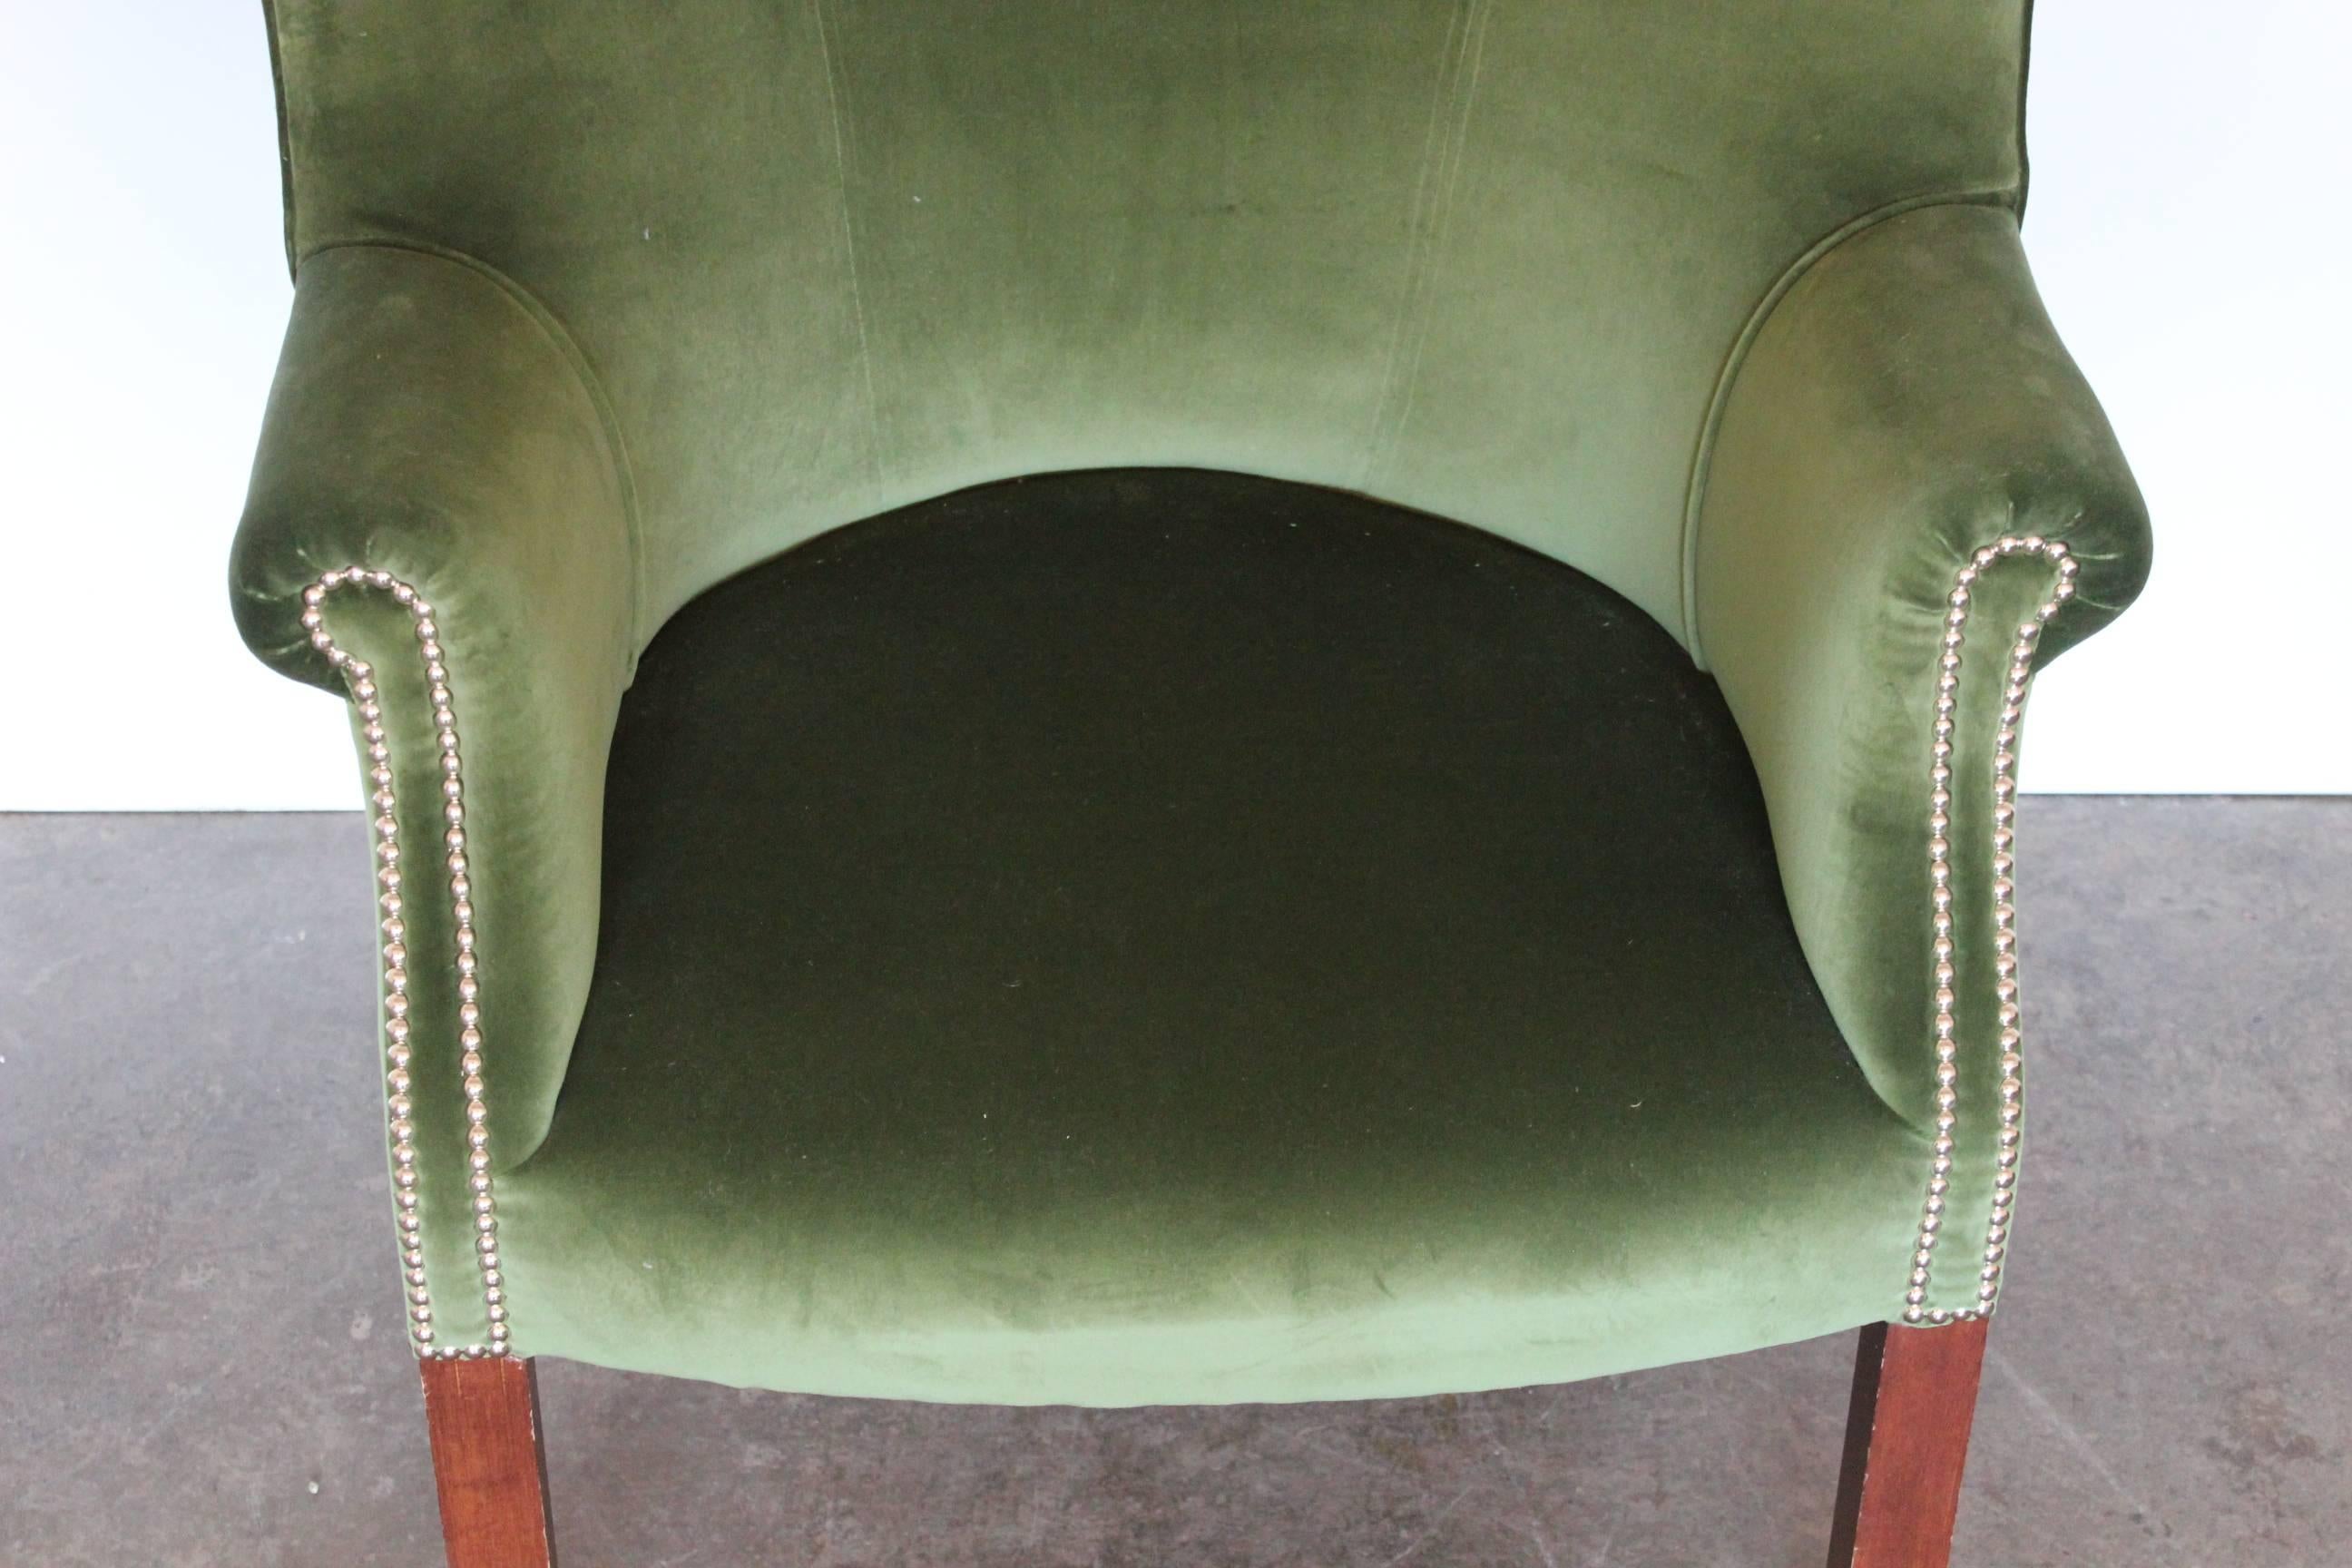 Hand-Crafted Ralph Lauren Compact “Wingback” Armchair in “English Riding” Green Velvet